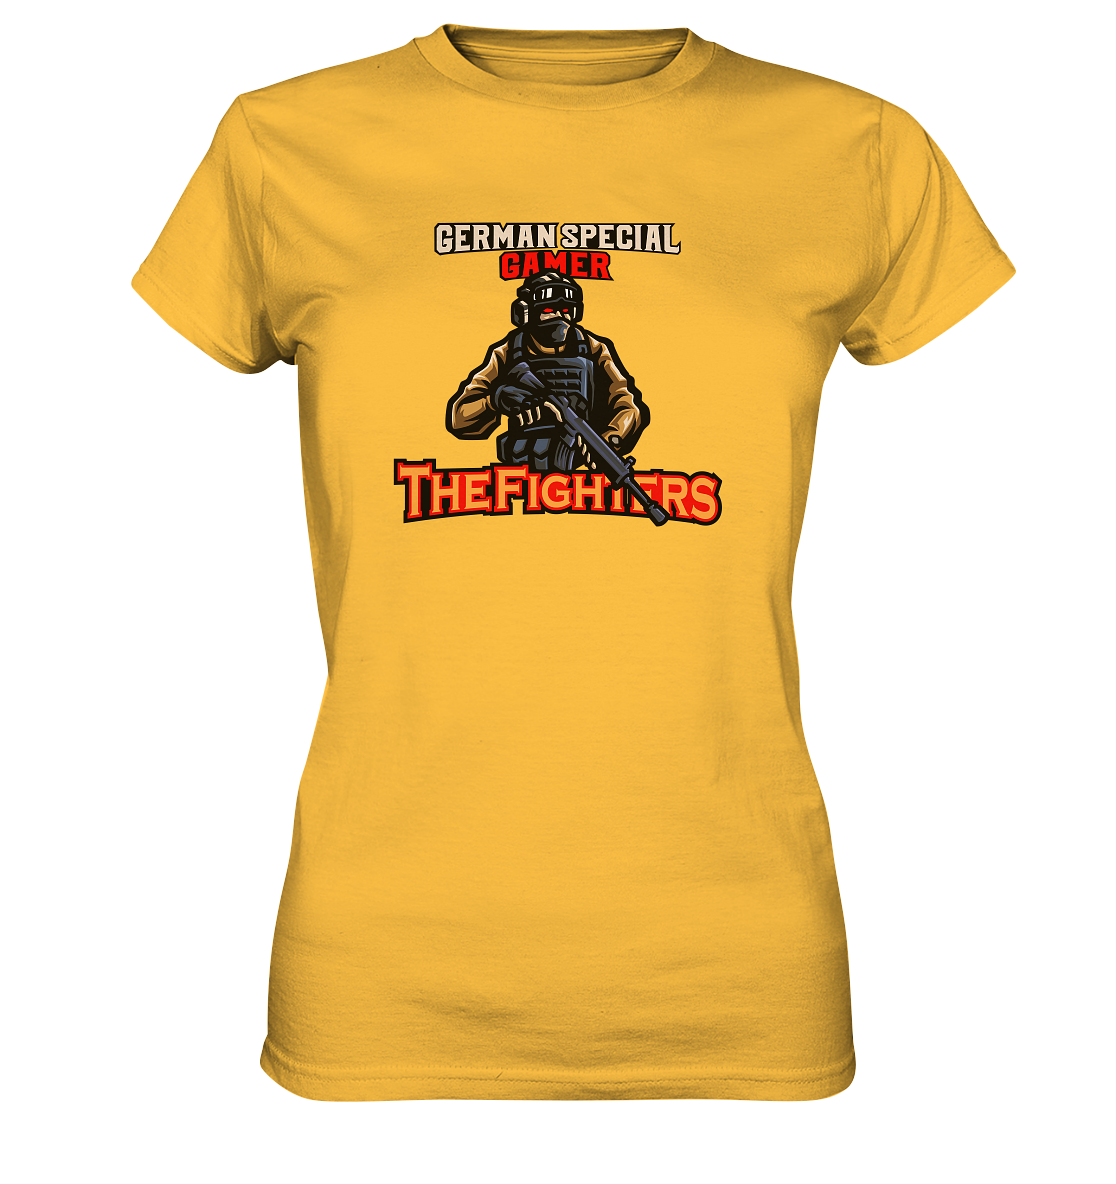 GERMAN SPECIAL GAMER - THE FIGHTERS - Ladies Basic Shirt